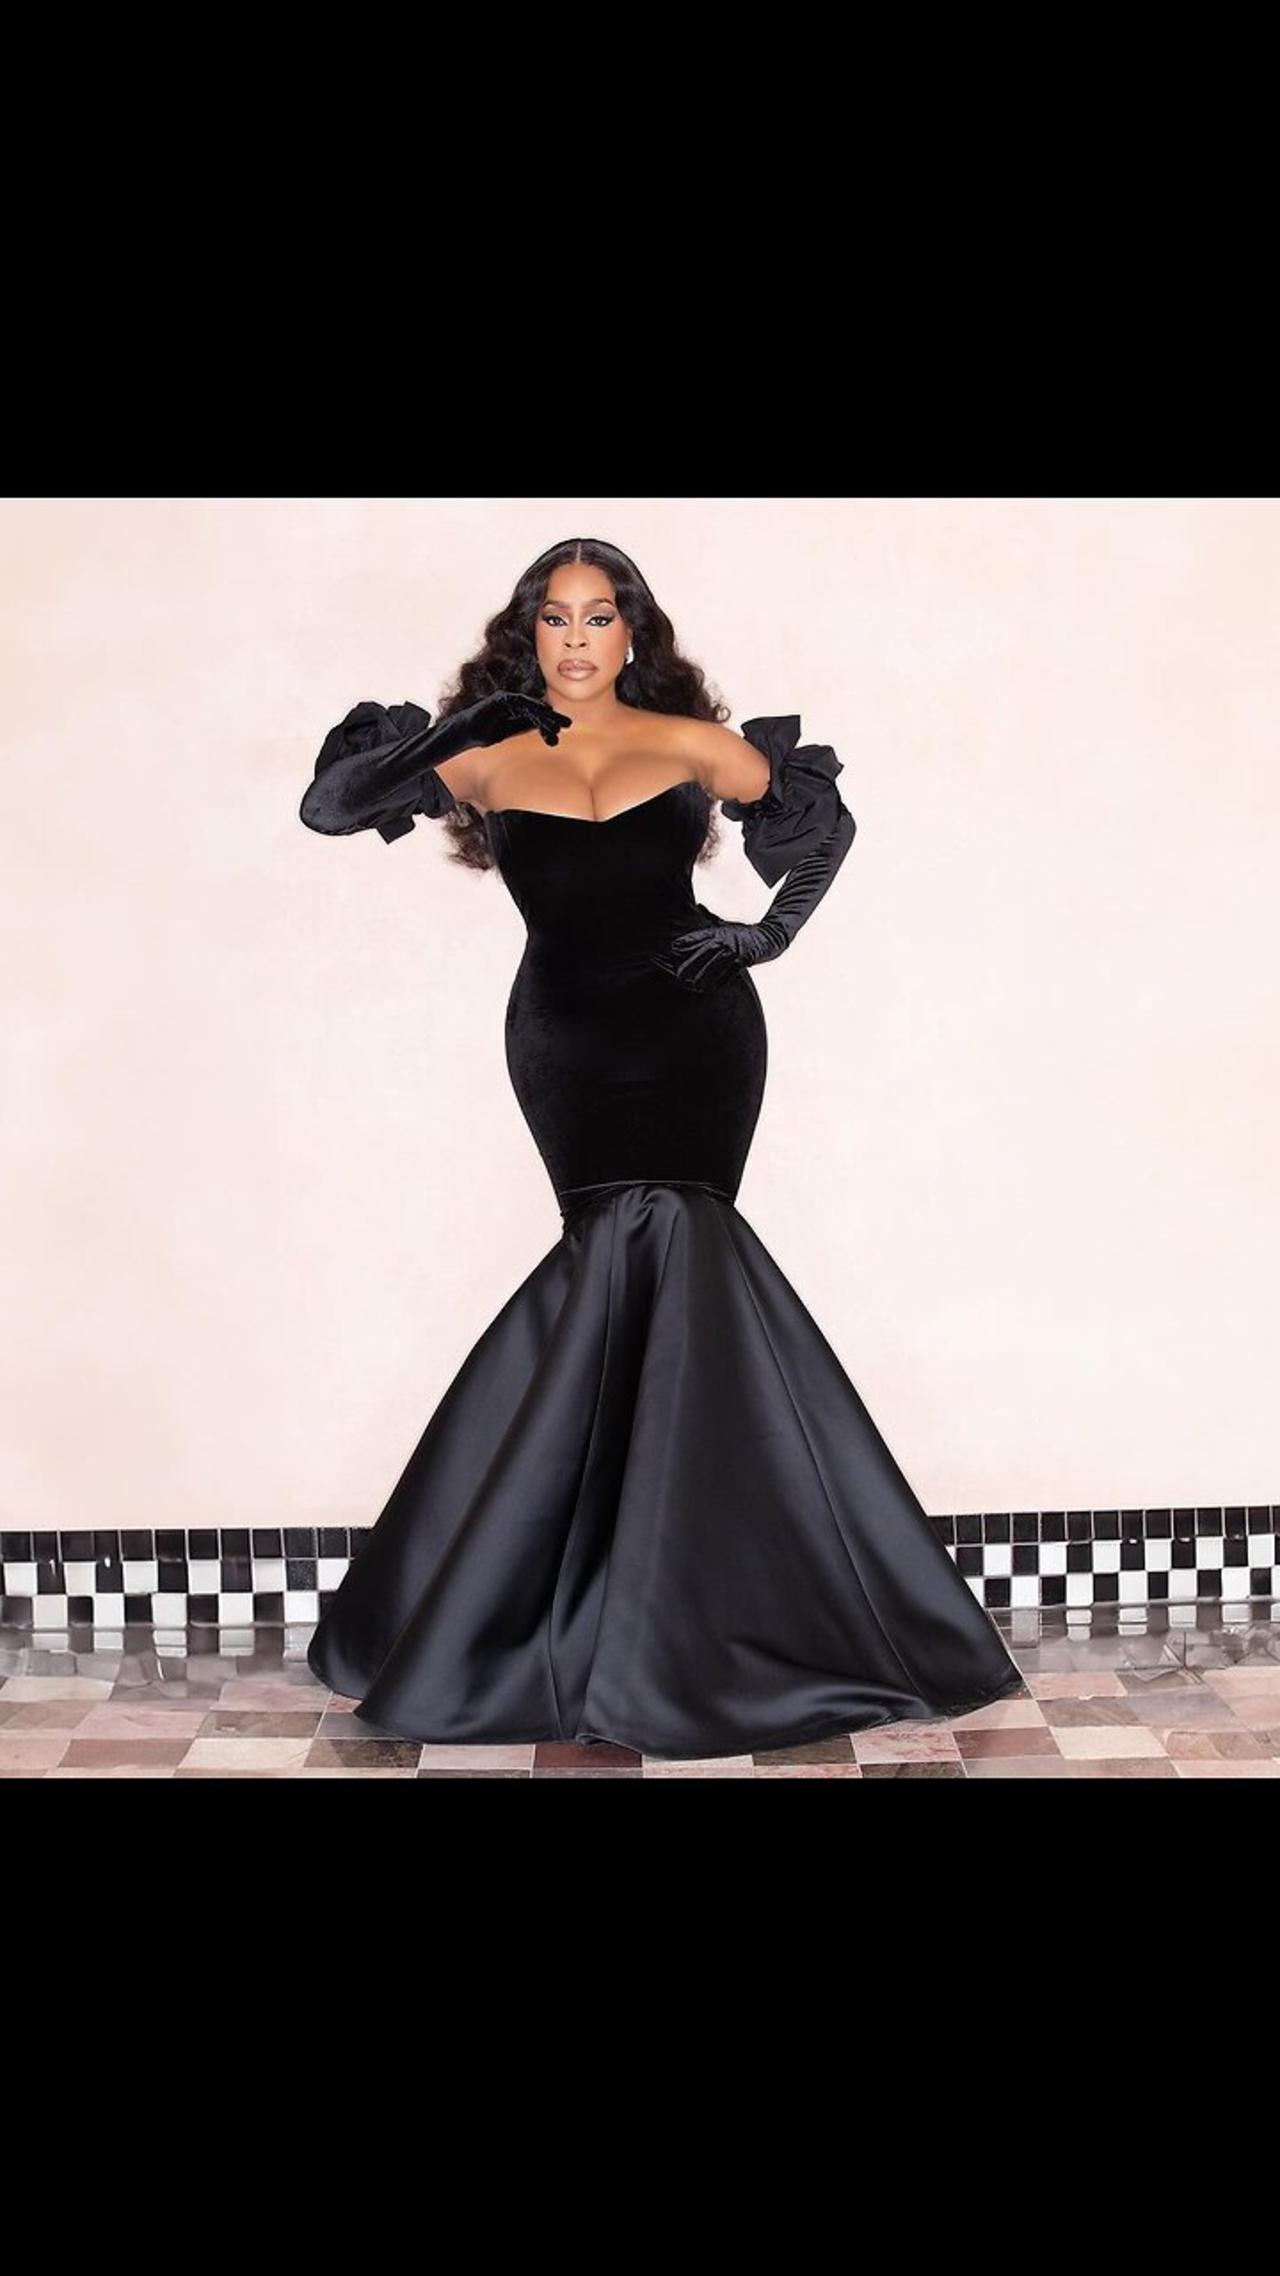 Niecy Nash Shows Off Her Gift From Oprah Winfrey For Her Emmy Win 💕